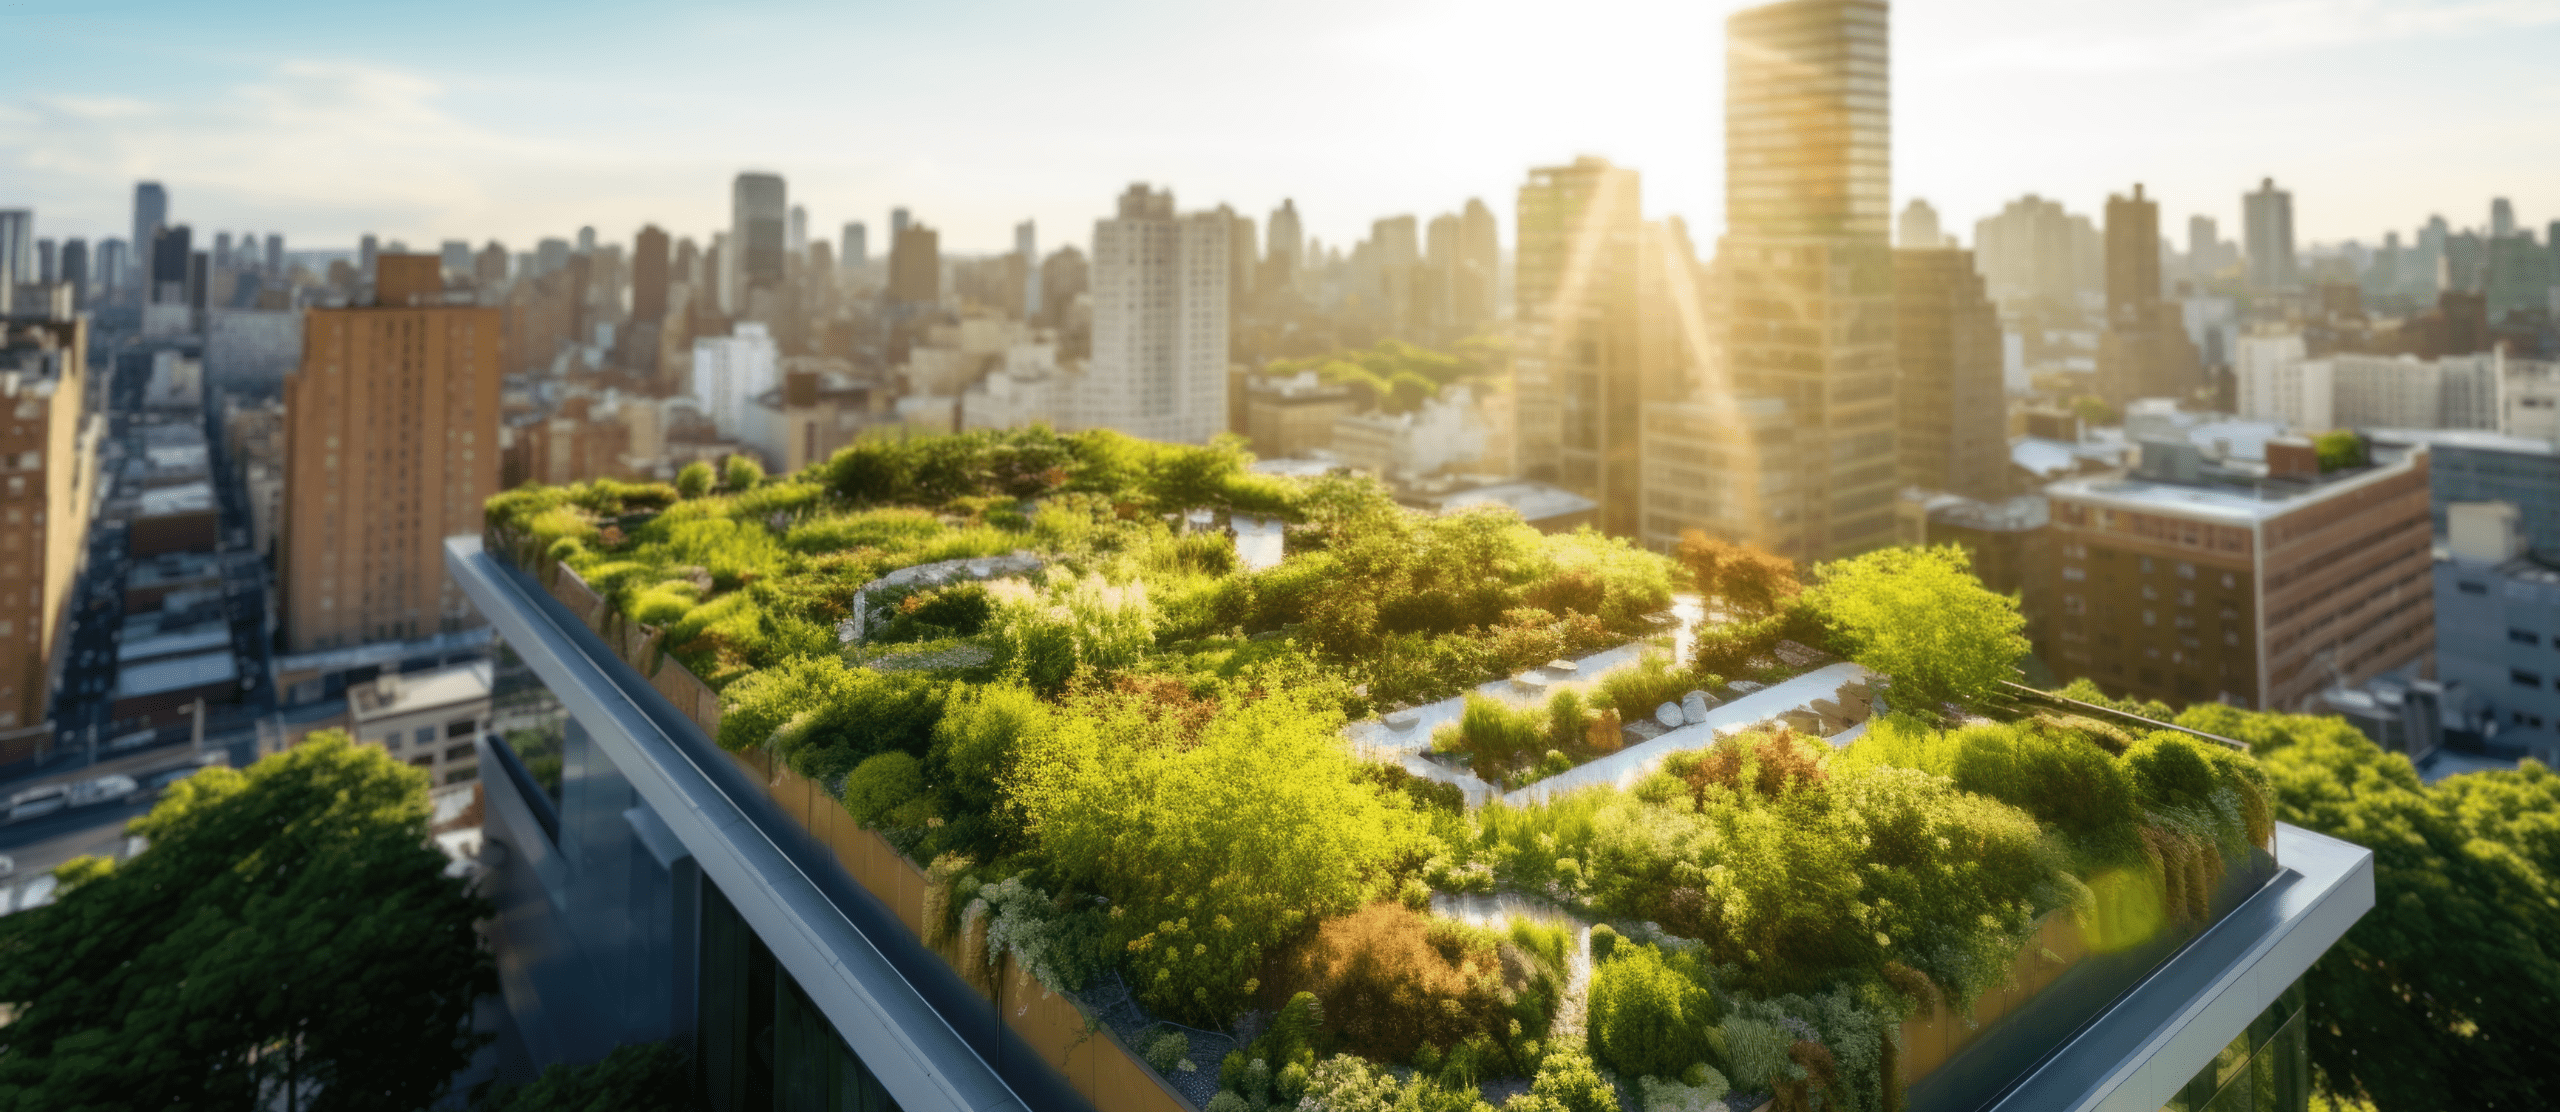 Aerial view of green rooftop garden showcasing sustainable city urban development